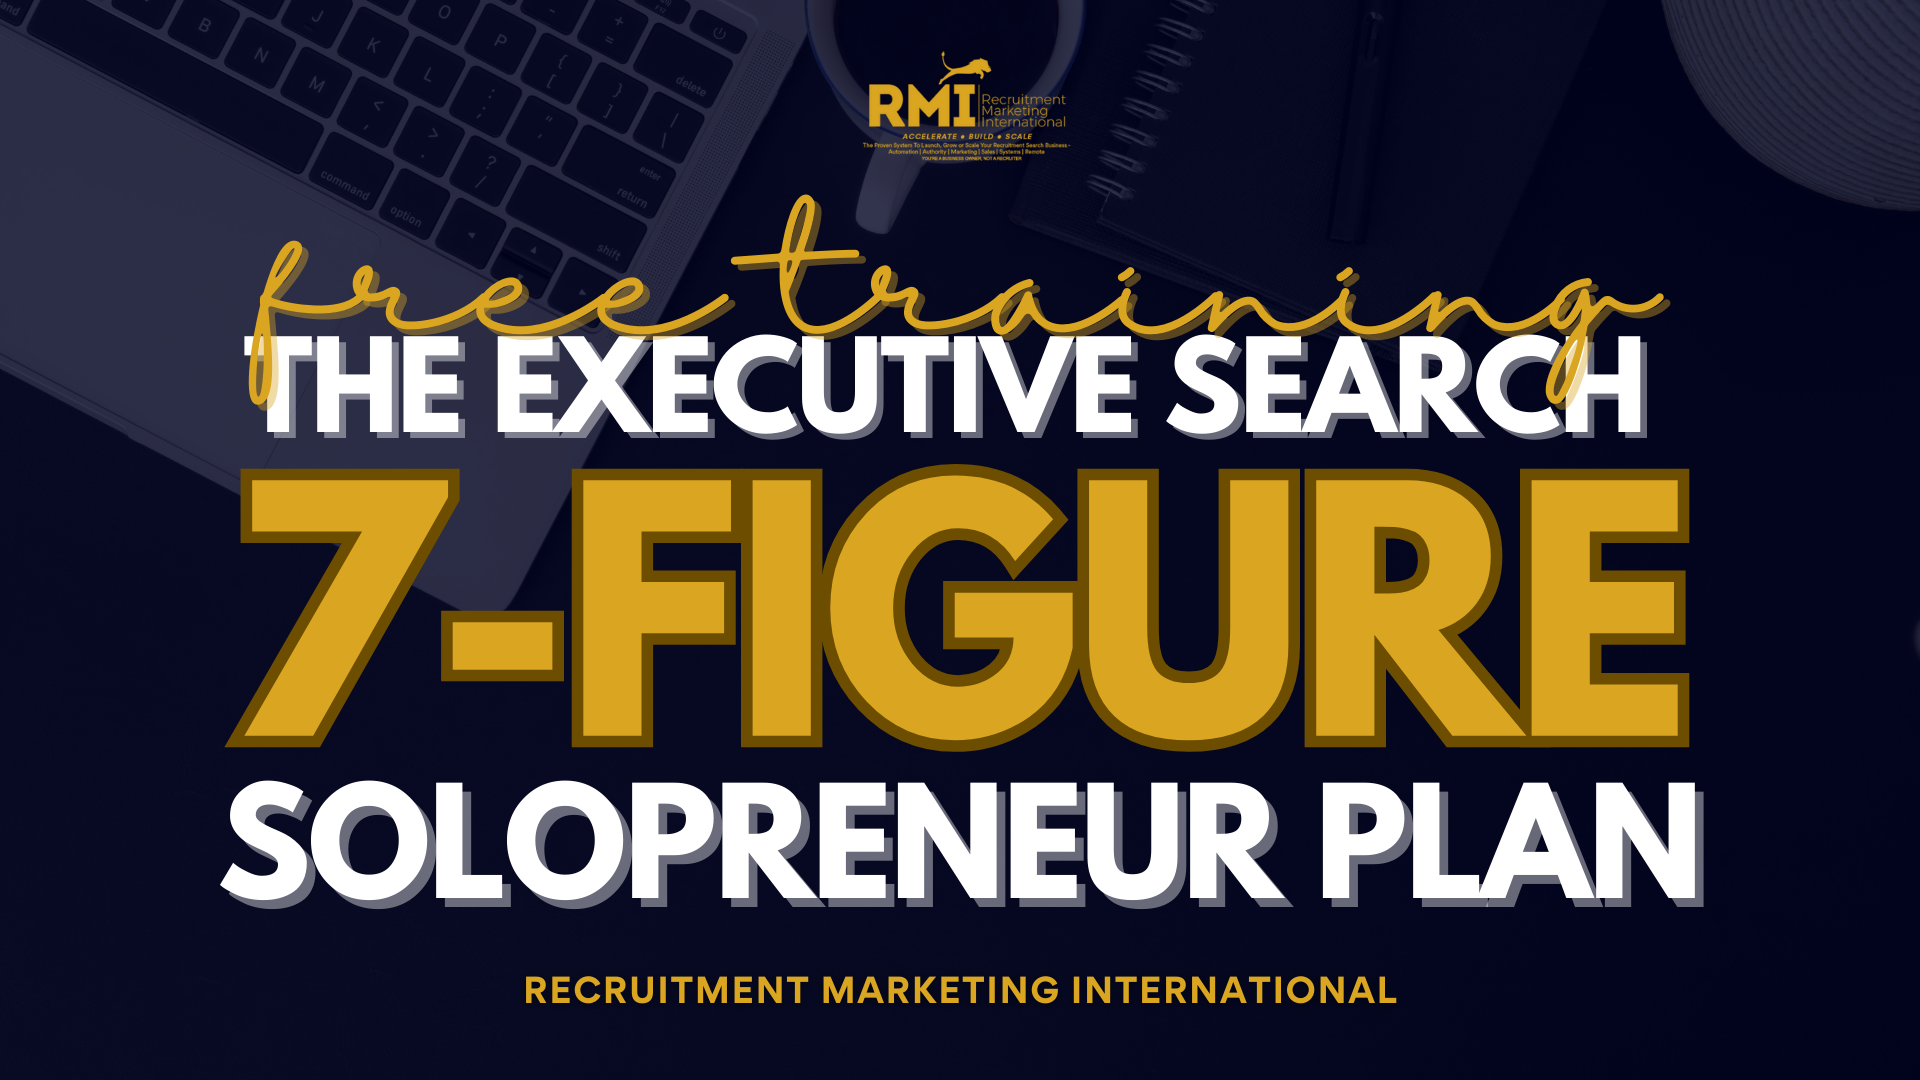 PODCAST 236 – THE EXECUTIVE SEARCH 7 FIGURE SOLOPRENEUR PLAN